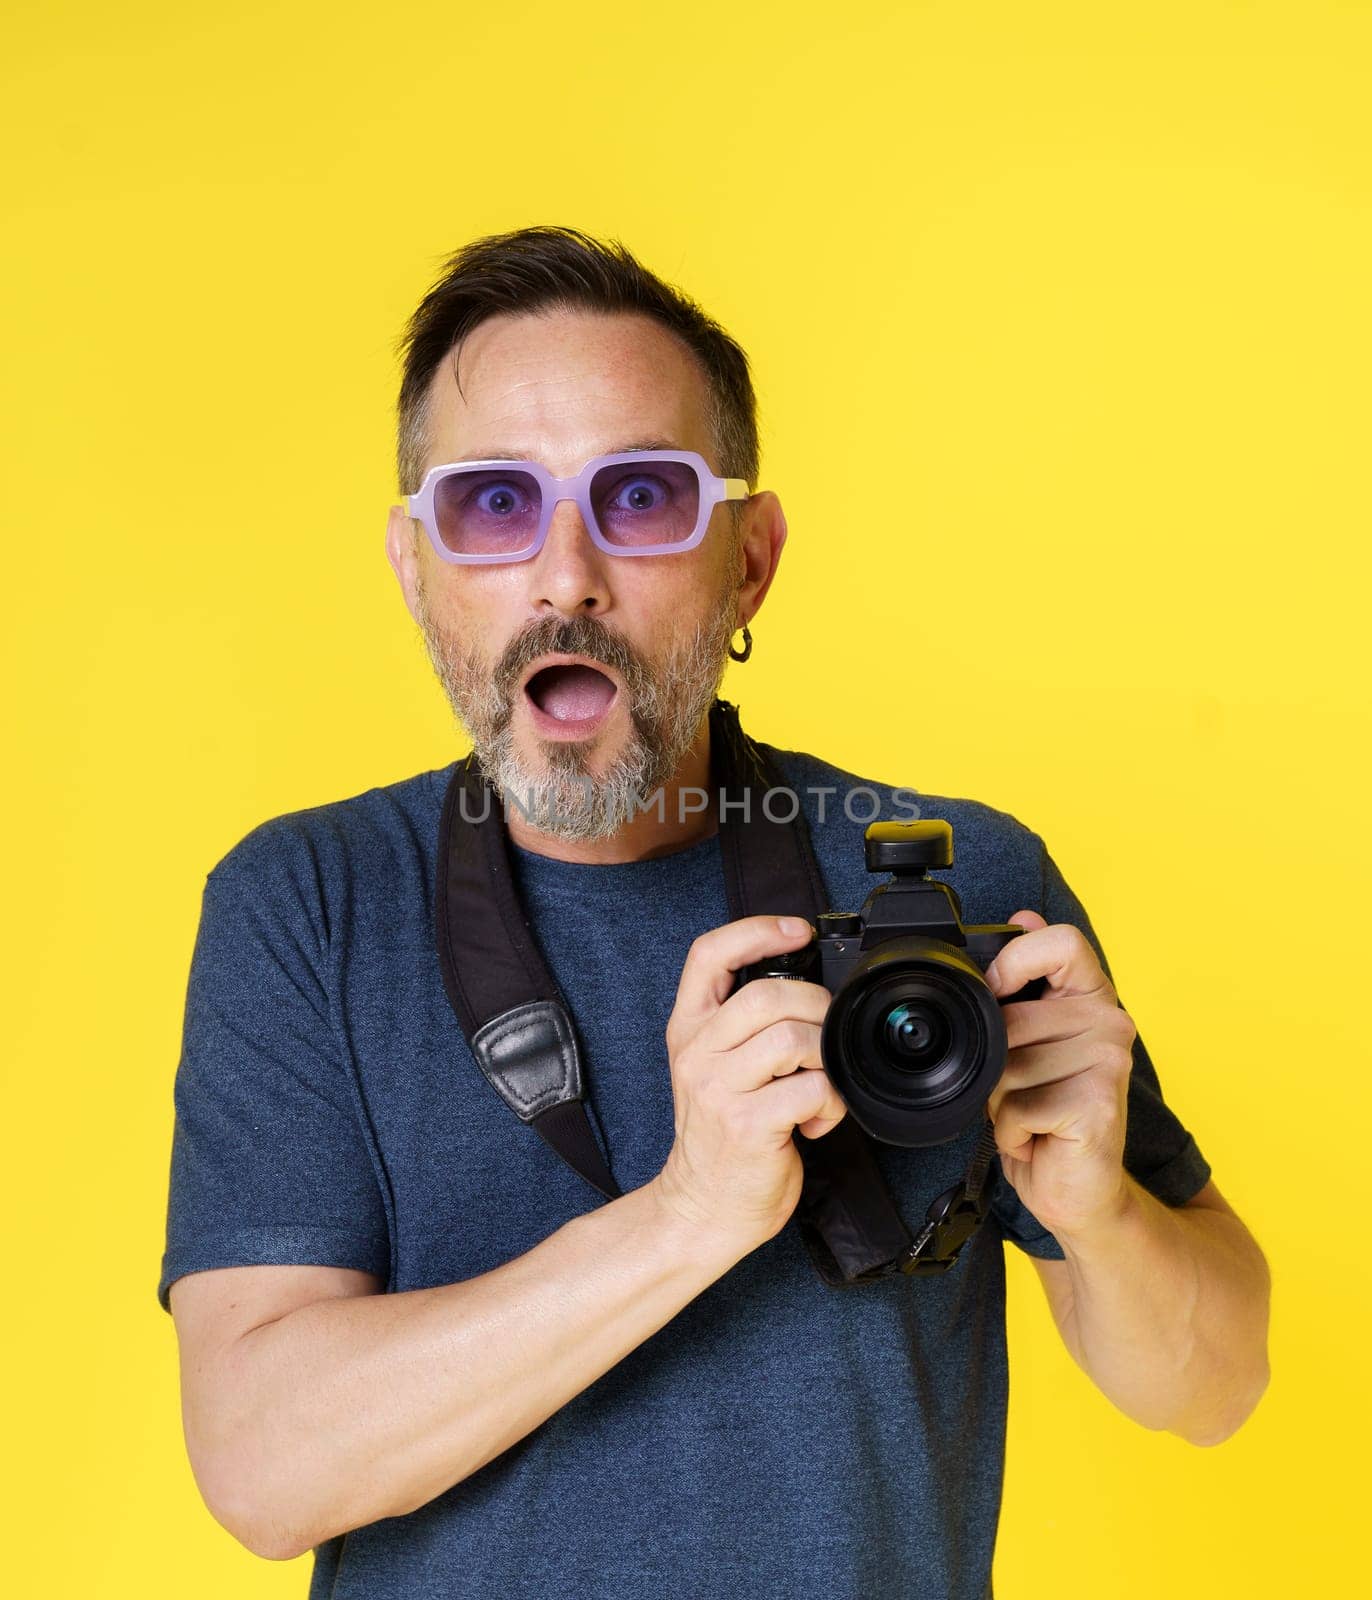 Passionate old photographer beams with excitement, holding mirrorless photo camera, in isolated studio shot on yellow background. Seasoned photographer continues pursue photography passion with zeal. High quality photo